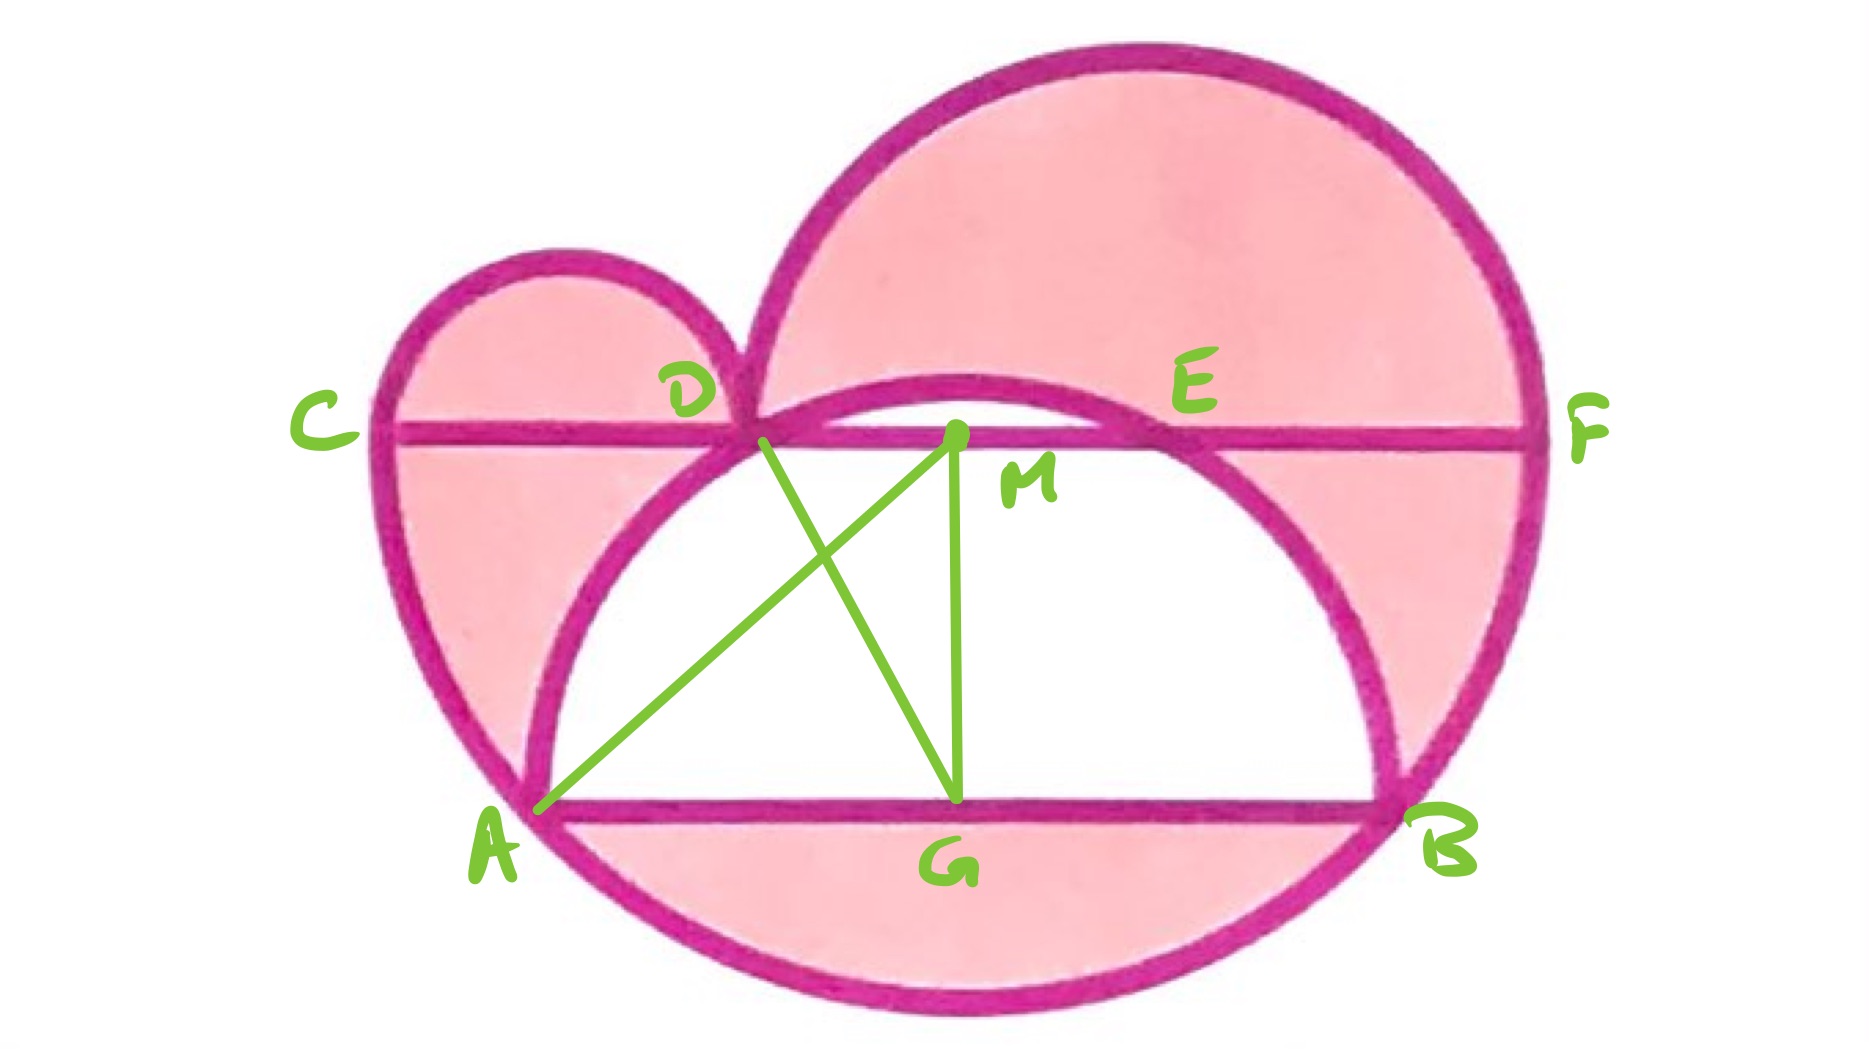 Four parallel semi-circles labelled